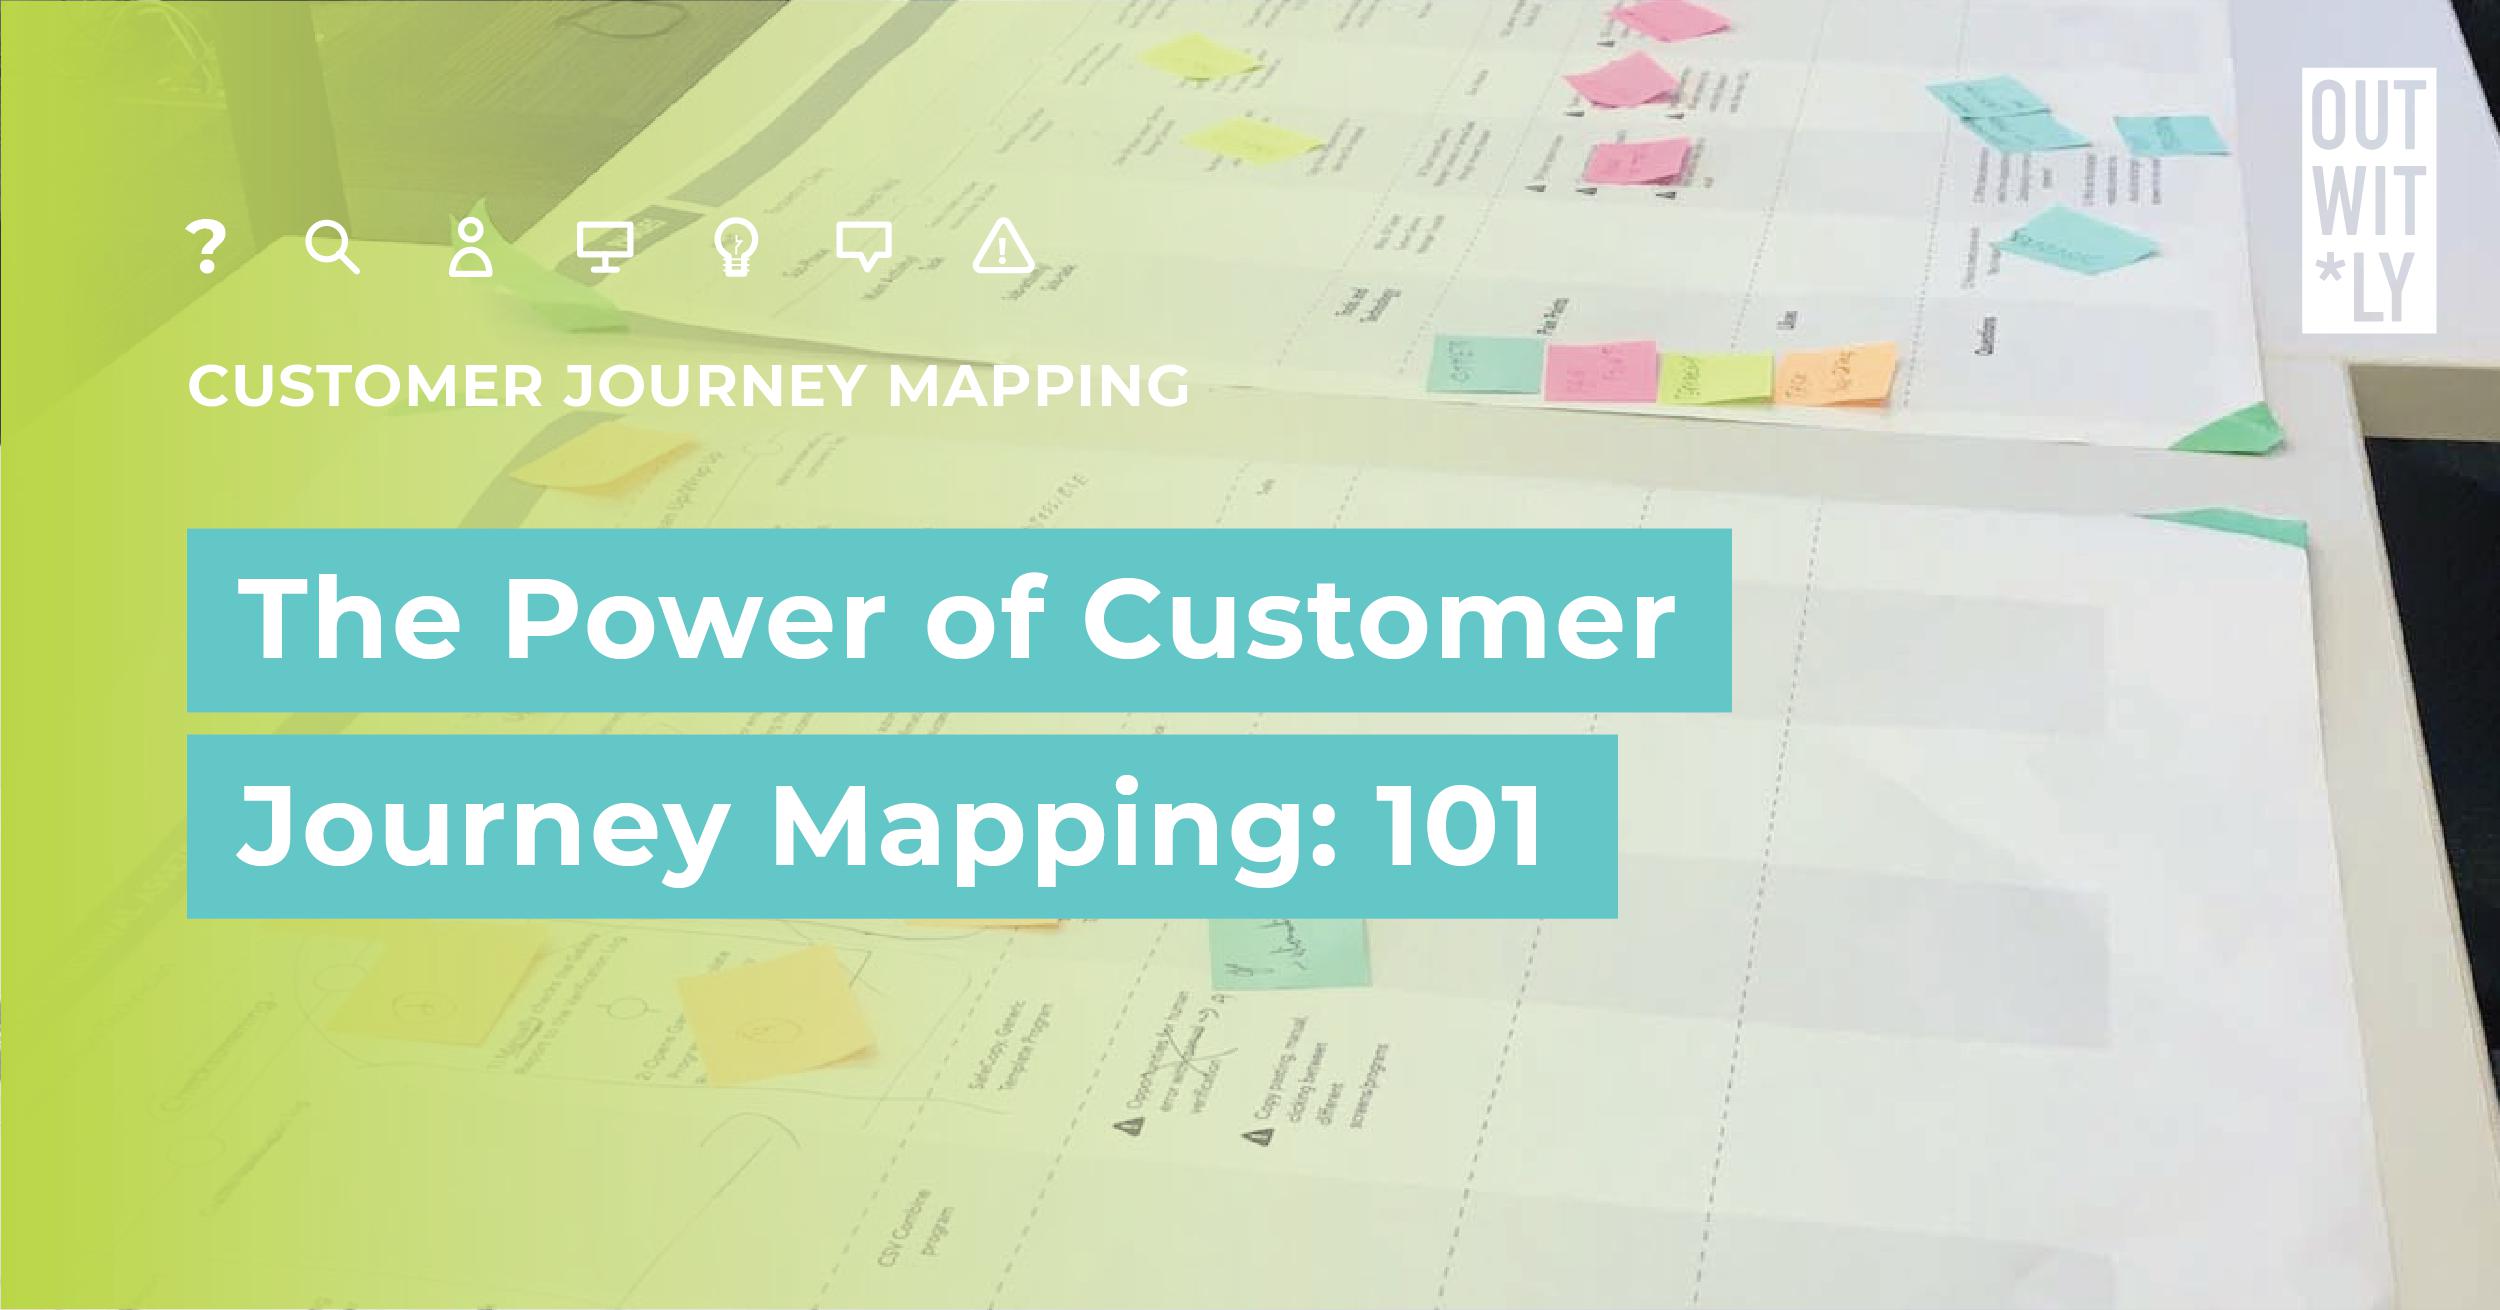 Large printed journey map with sticky notes, and title ‘The Power of Customer Journey Mapping: 101’